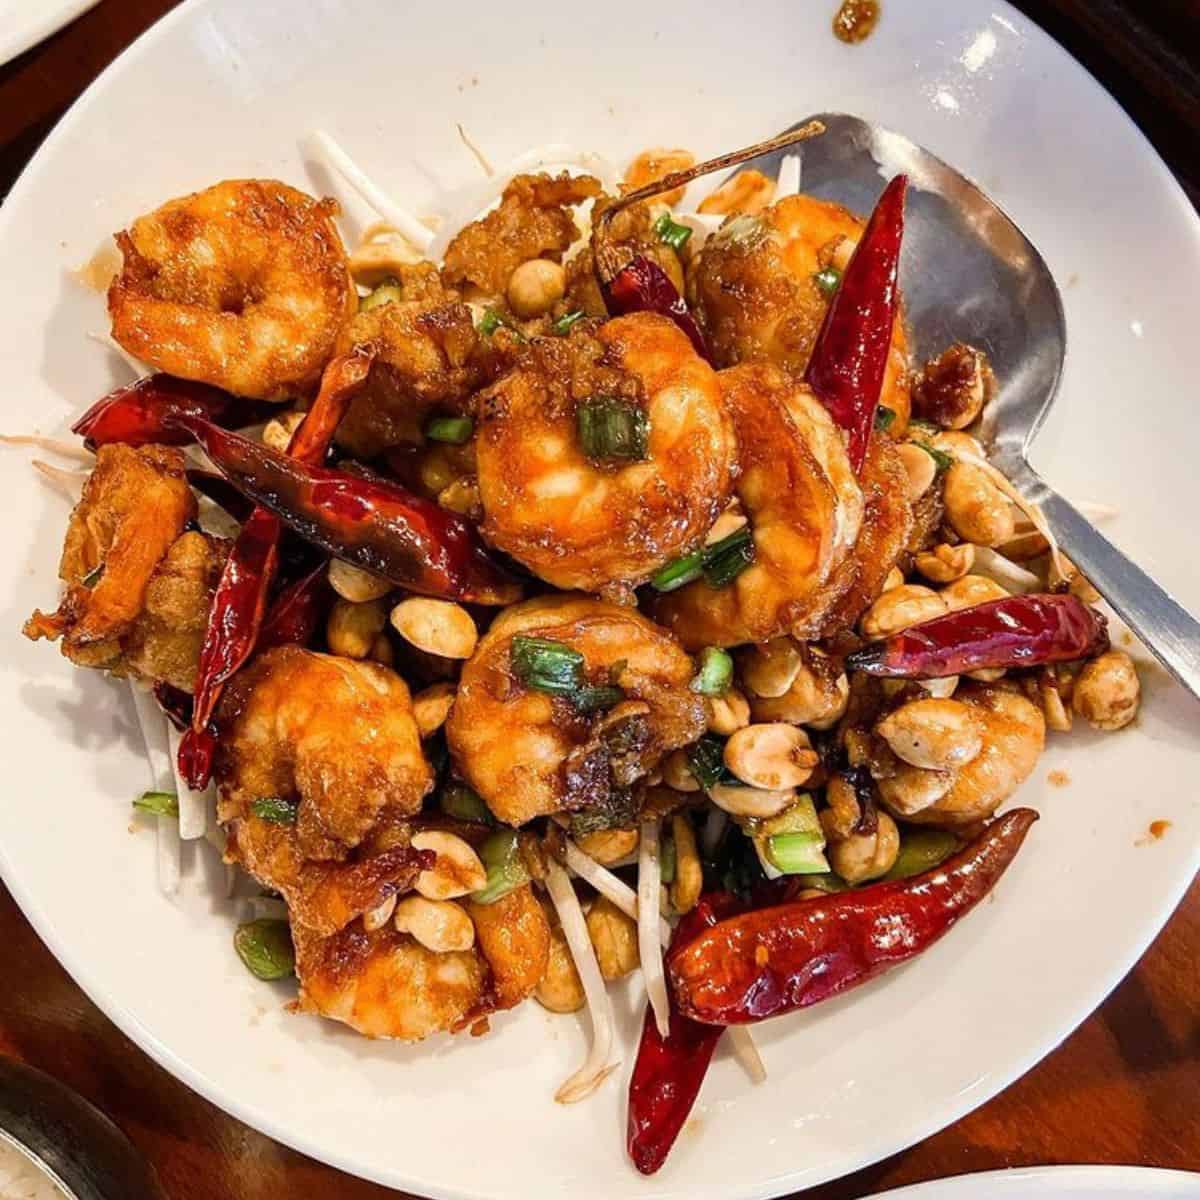 kung pao shrimp dish which has nuts